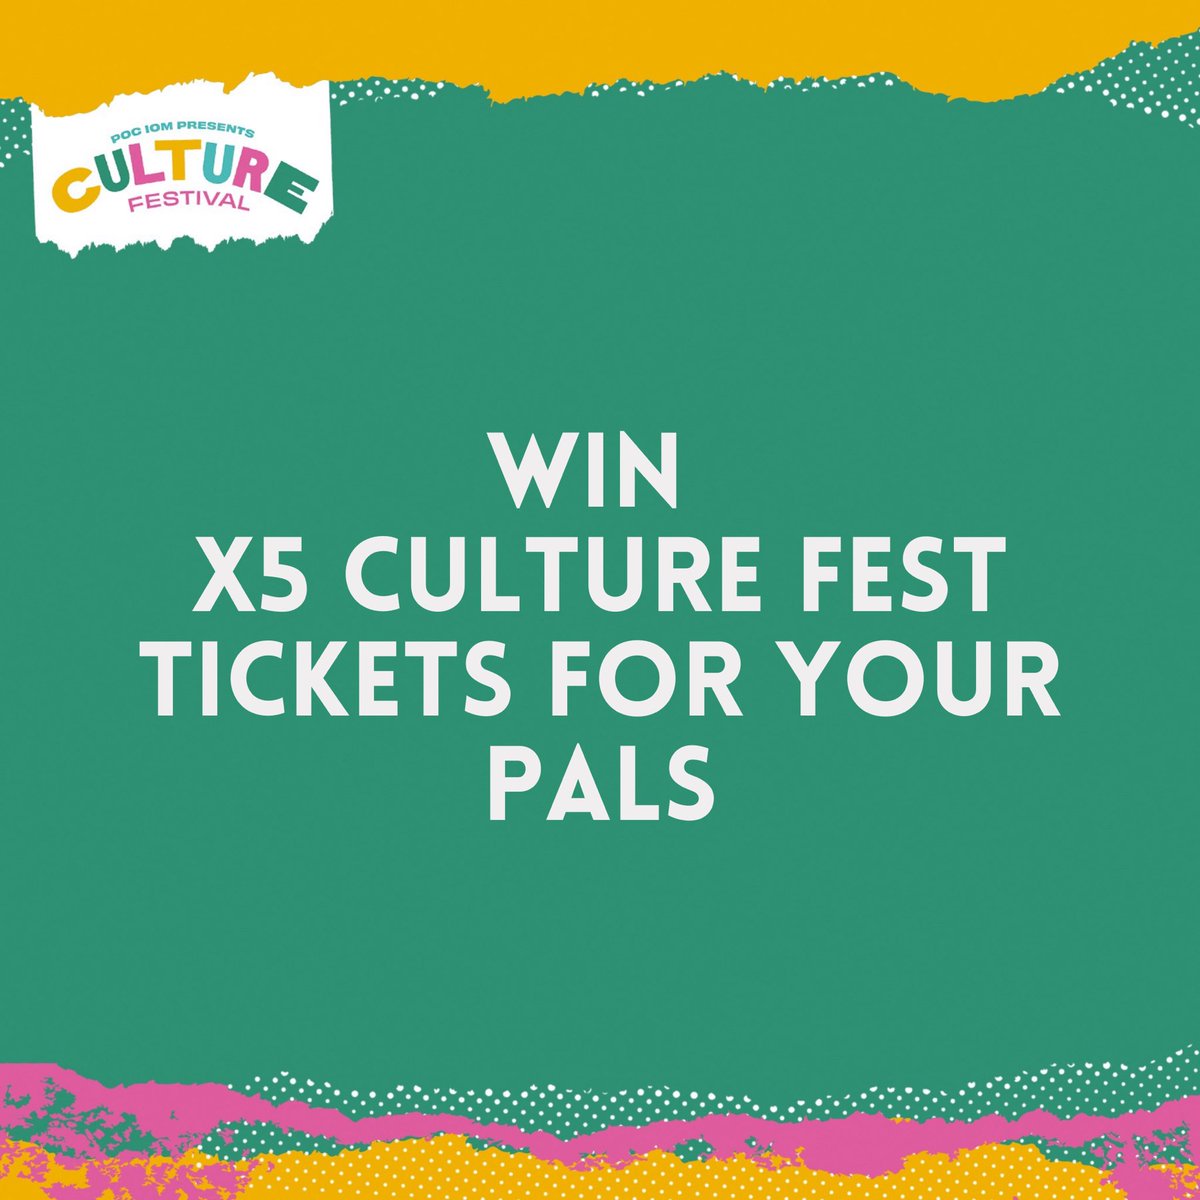 You liked it so much last time, we are doing it again! Everyone who purchases a Culture Fest ticket within the next 24 hours (12pm on 18th August - 12pm on 19th August) will be entered into a draw to win 5 extra free tickets for their friends and family! (1/2)